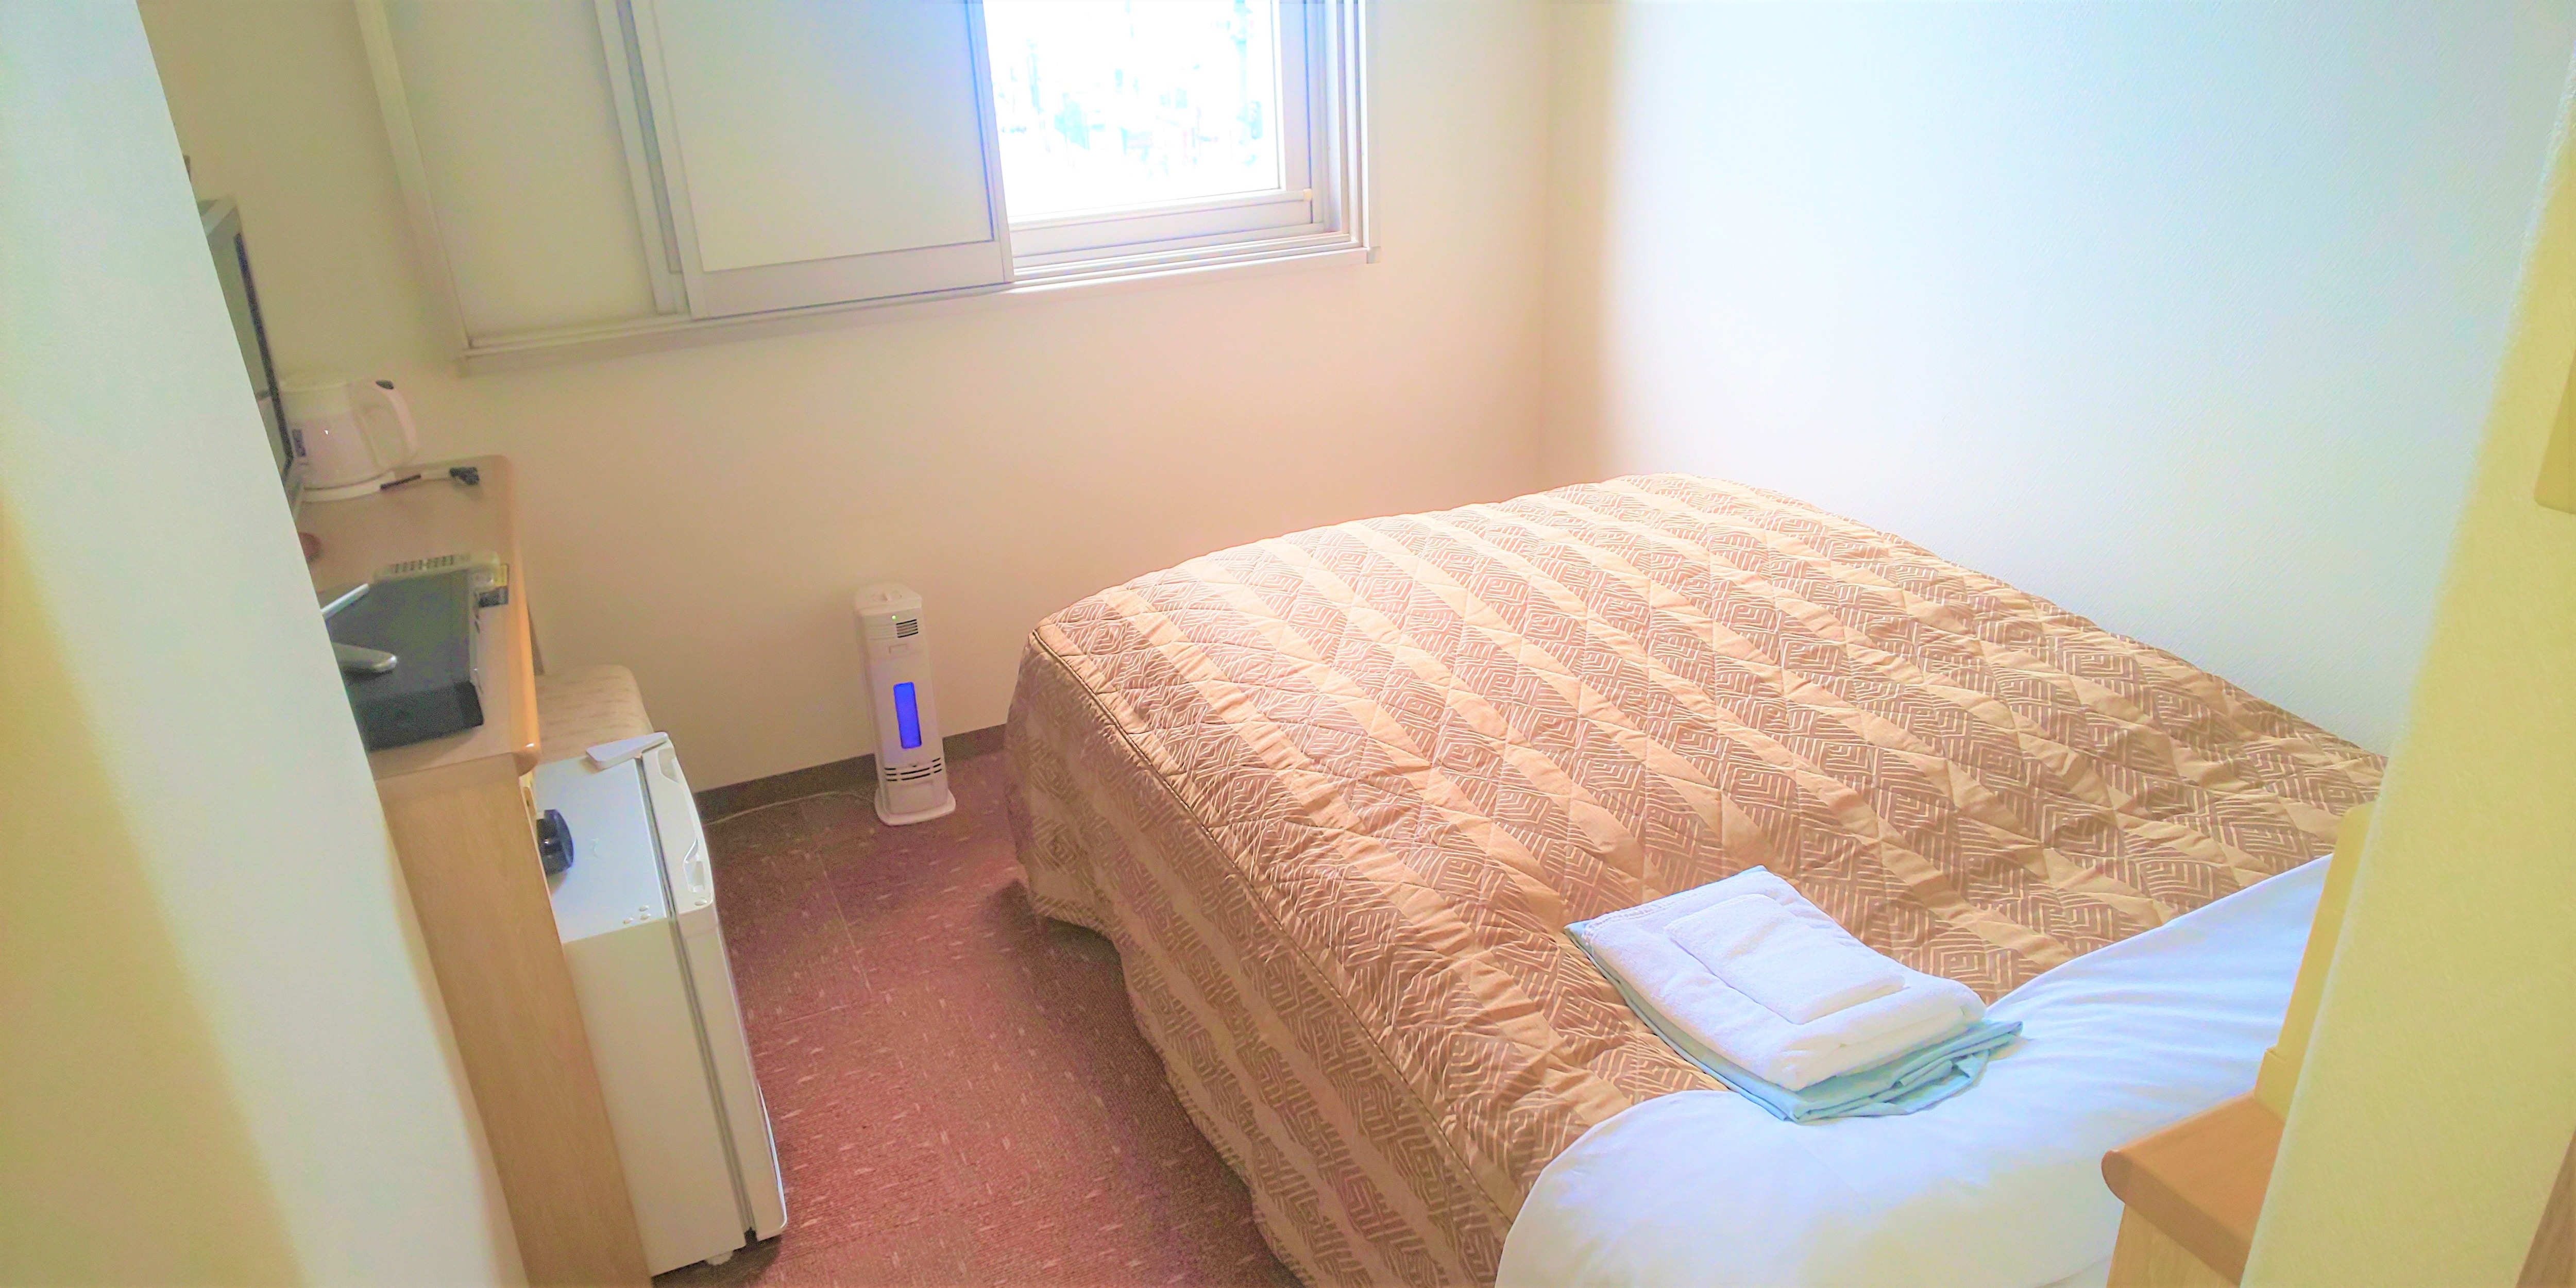 ■ Single room. Smoking and non-smoking rooms are available.